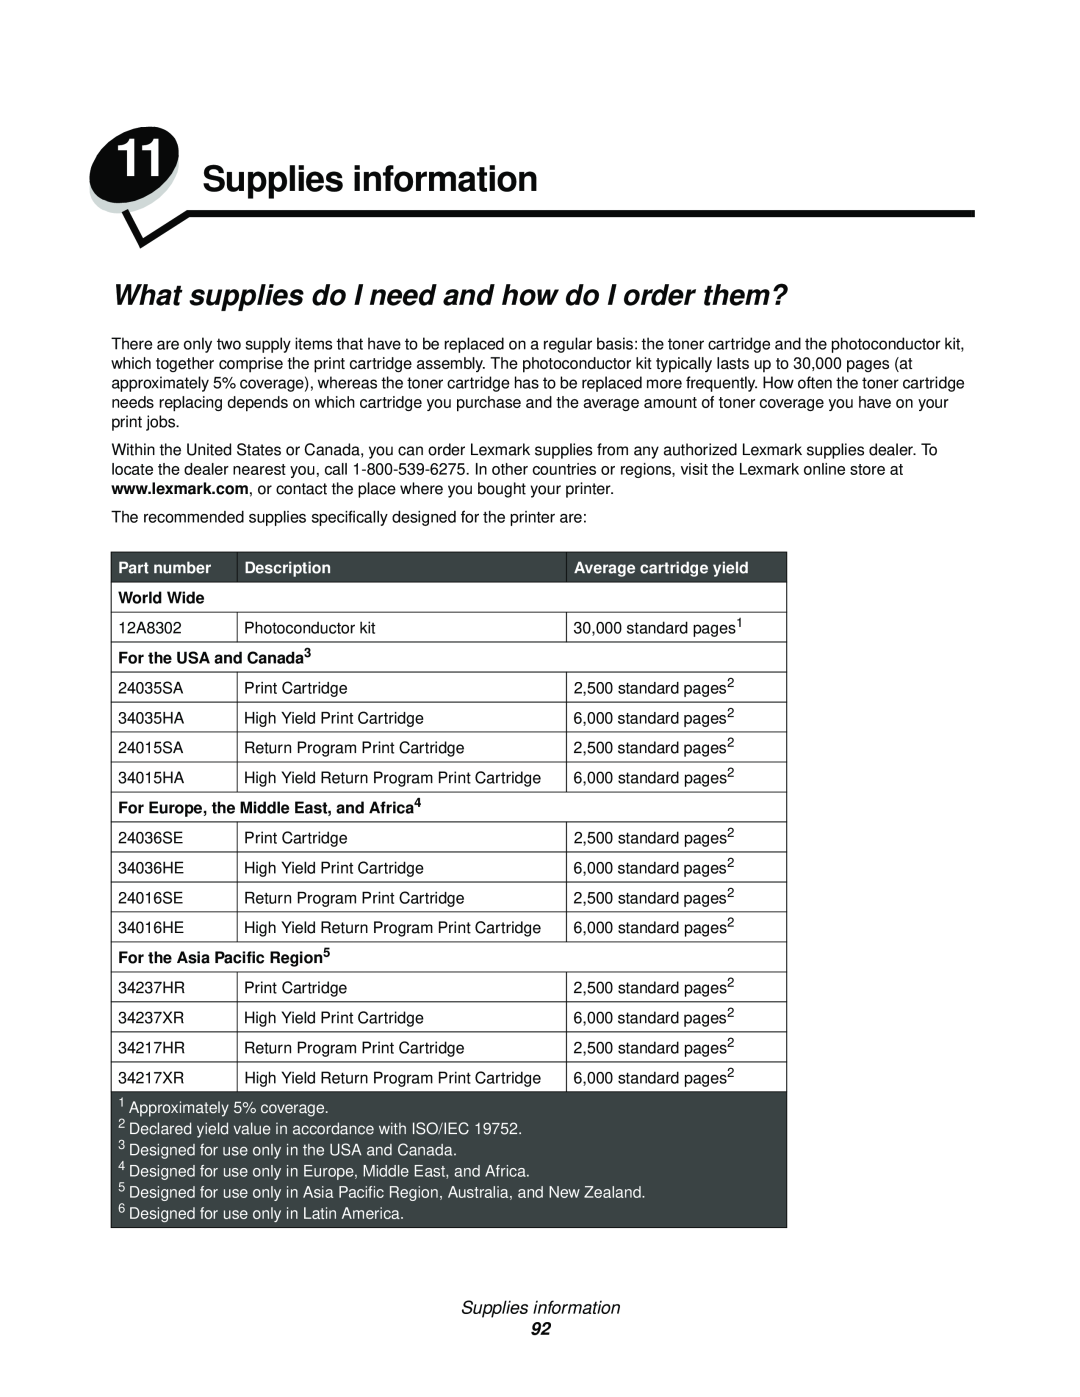 Lexmark 342n, 340 manual Supplies information, What supplies do I need and how do I order them?, Part number, Description 